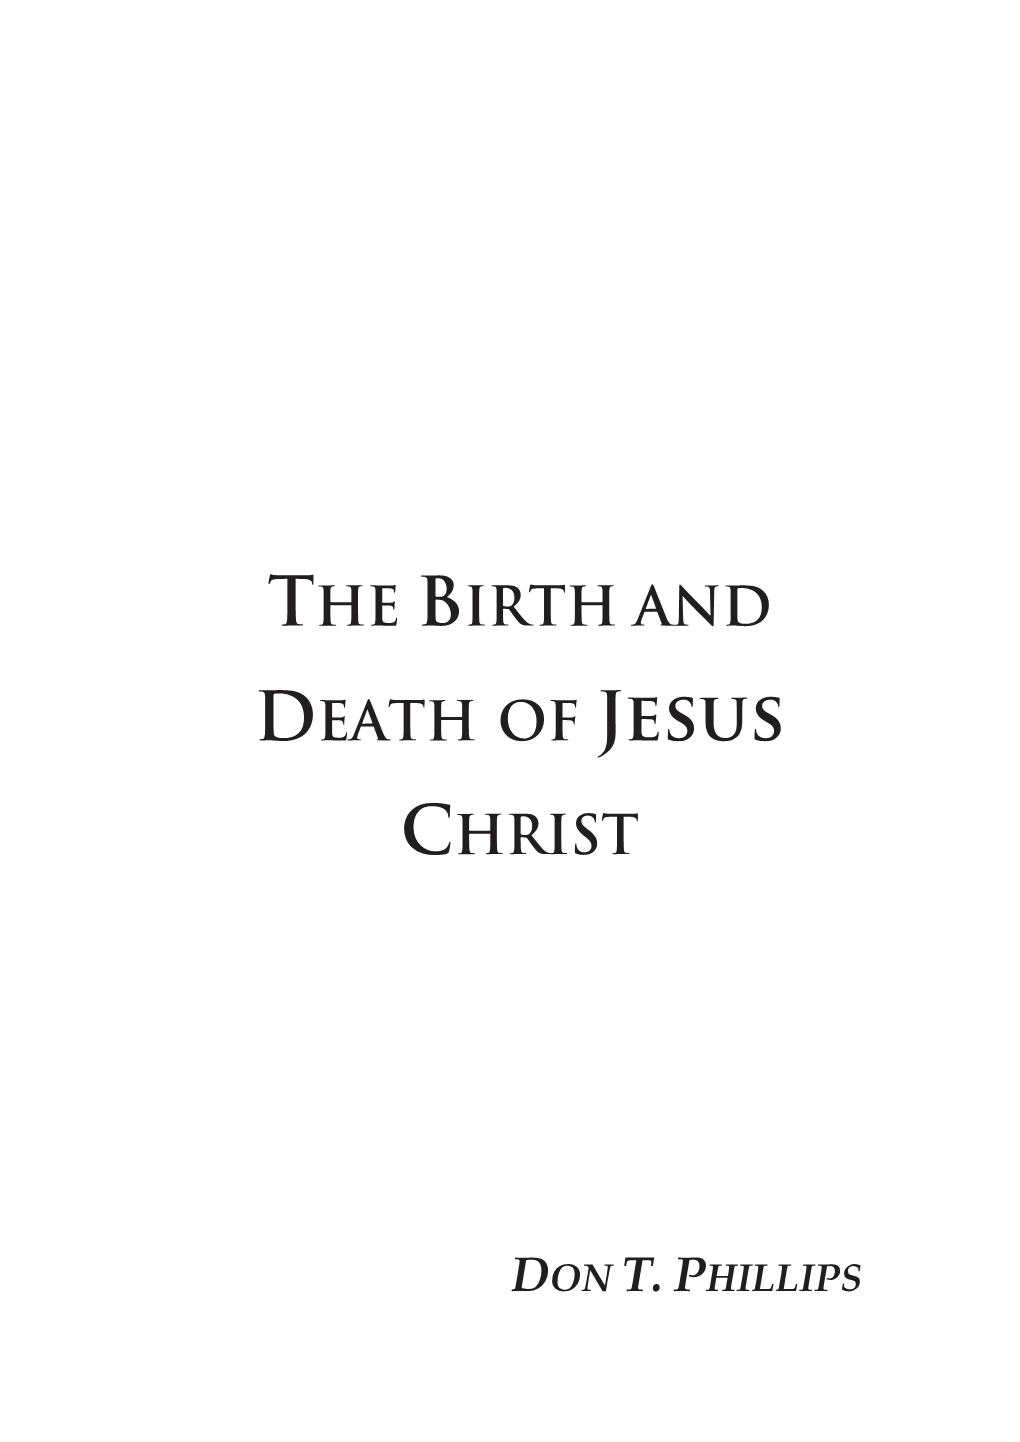 The Birth and Death of Christ